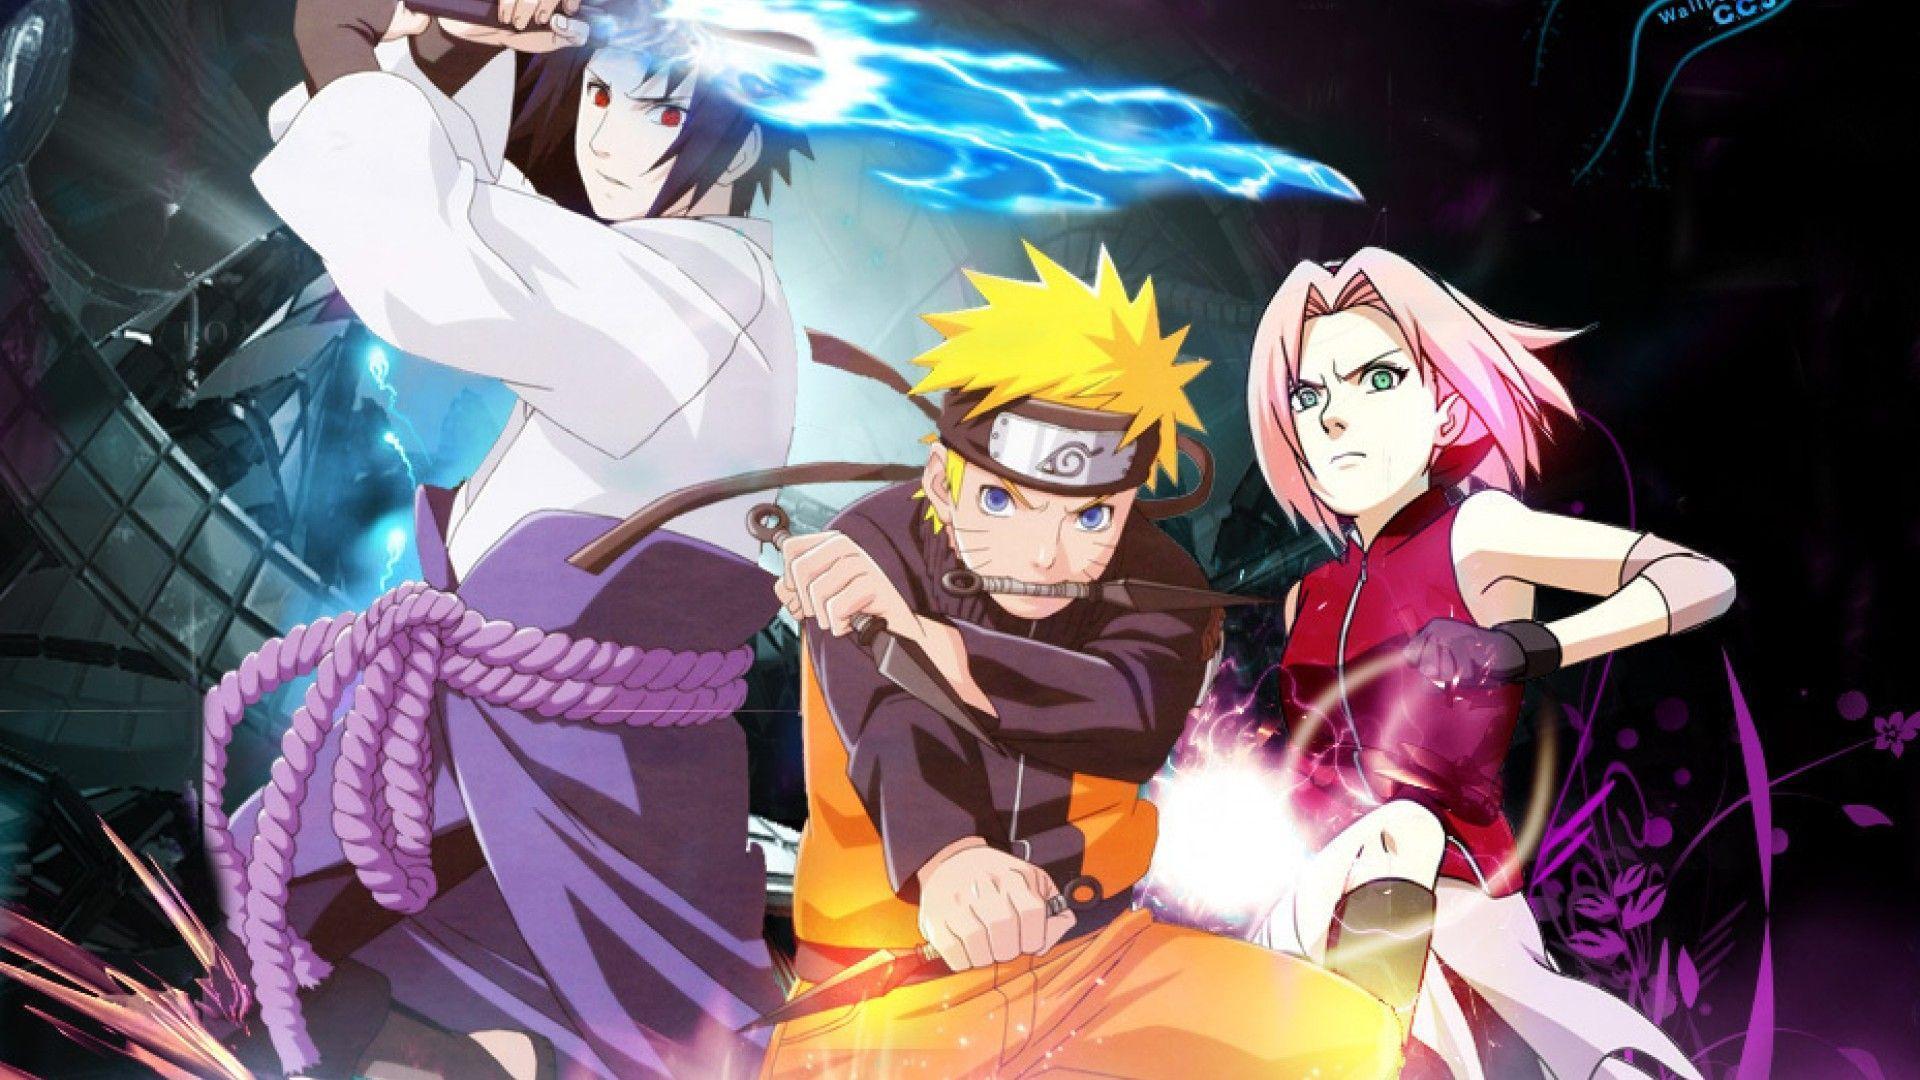 Team 7 Wallpapers - Top Free Team 7 Backgrounds ...